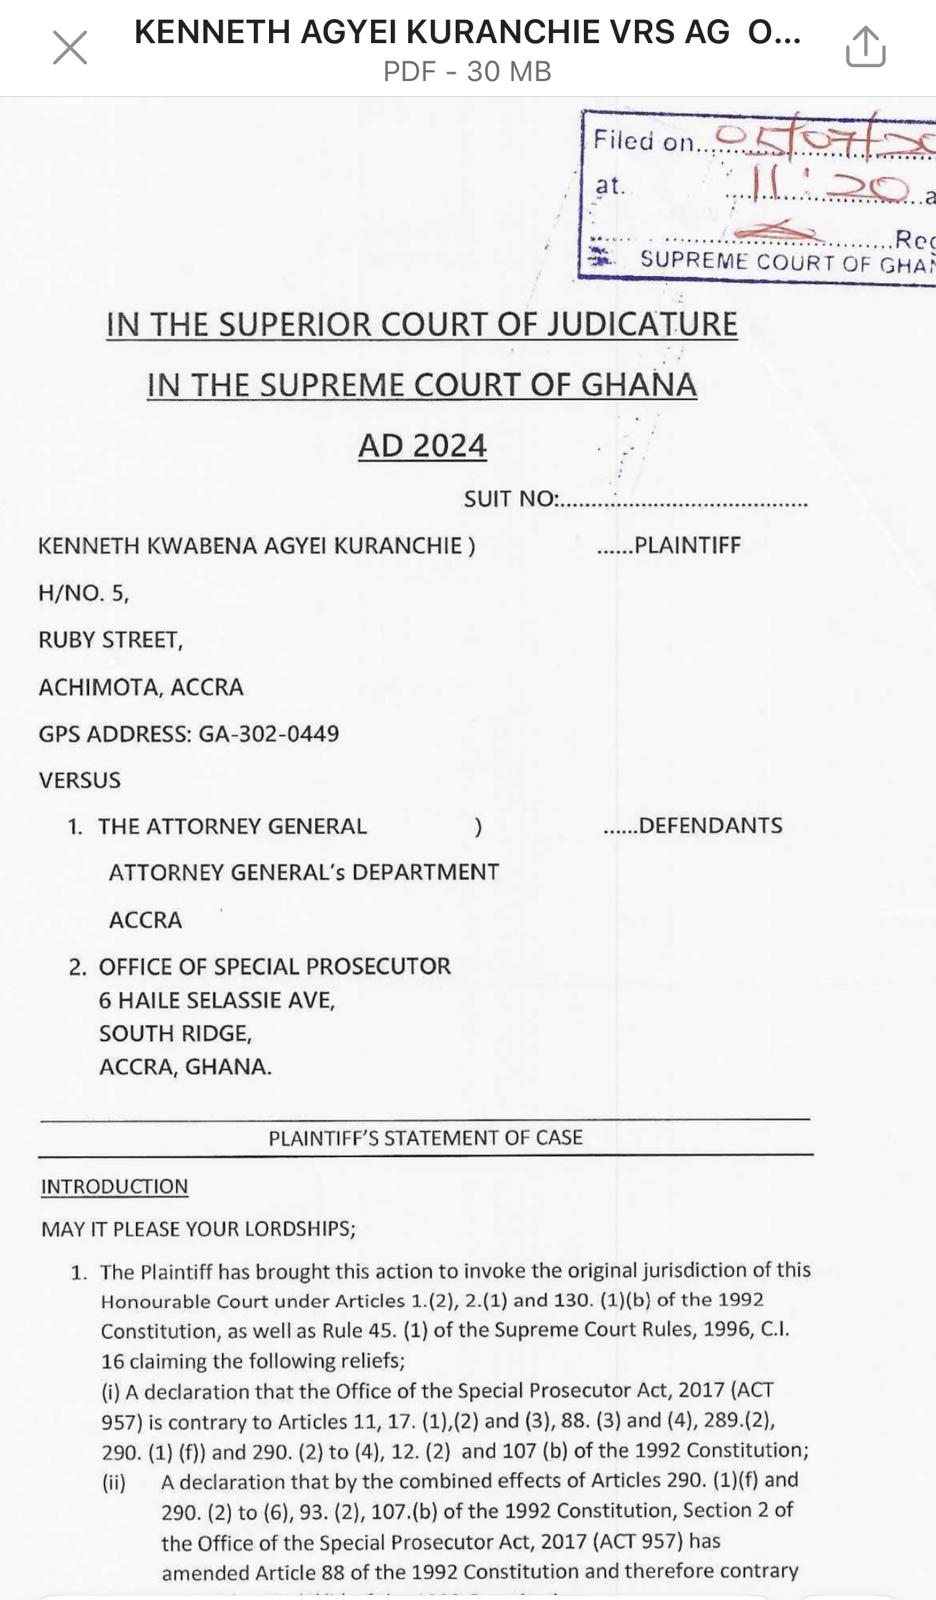 Ken Kuranchie sues AG over constitutionality of Special Prosecutor